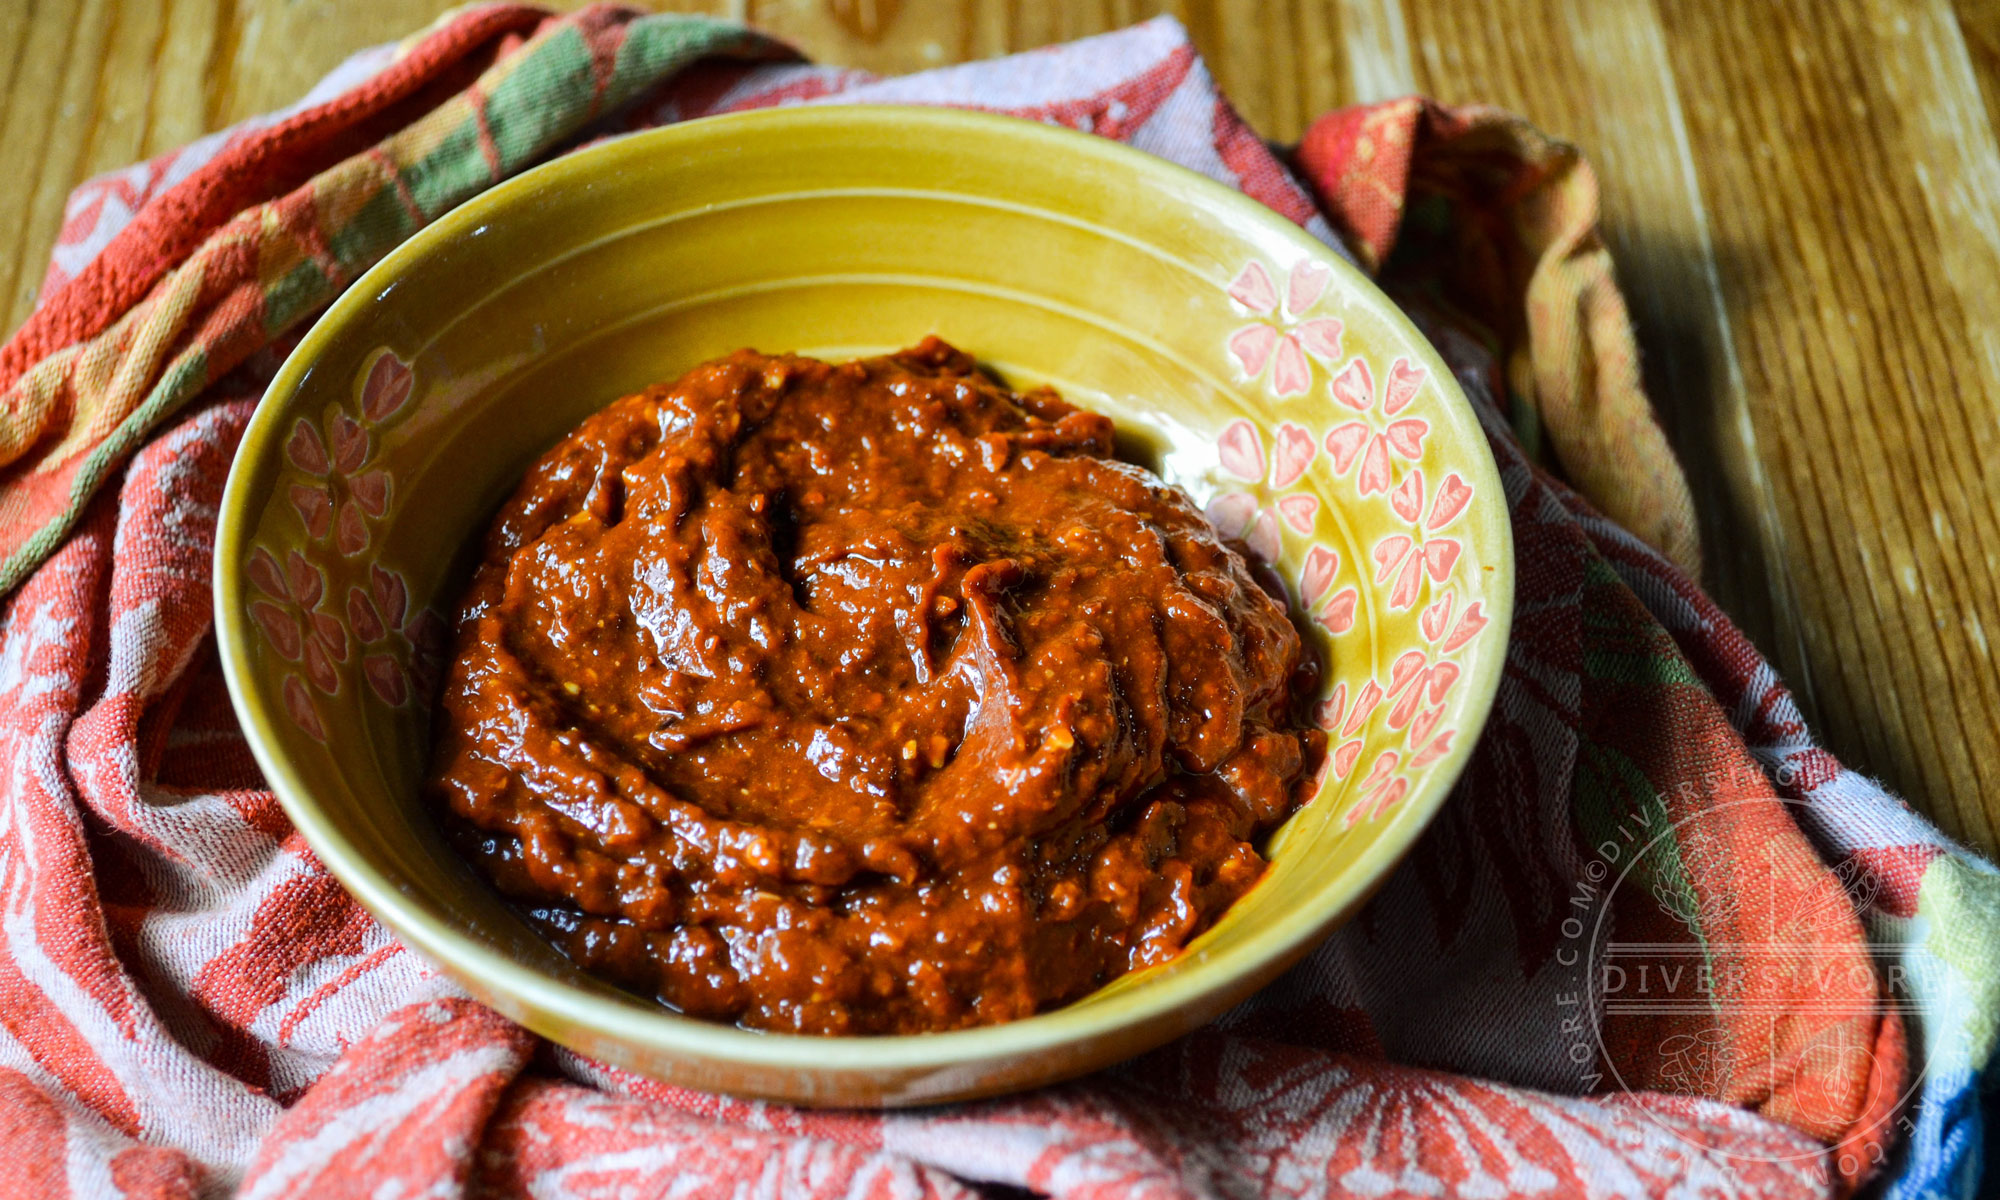 K'uut Bi Ik (Dried Chili Salsa) made with morita chipotles in a small yellow bowl on a bunched up patterned cloth